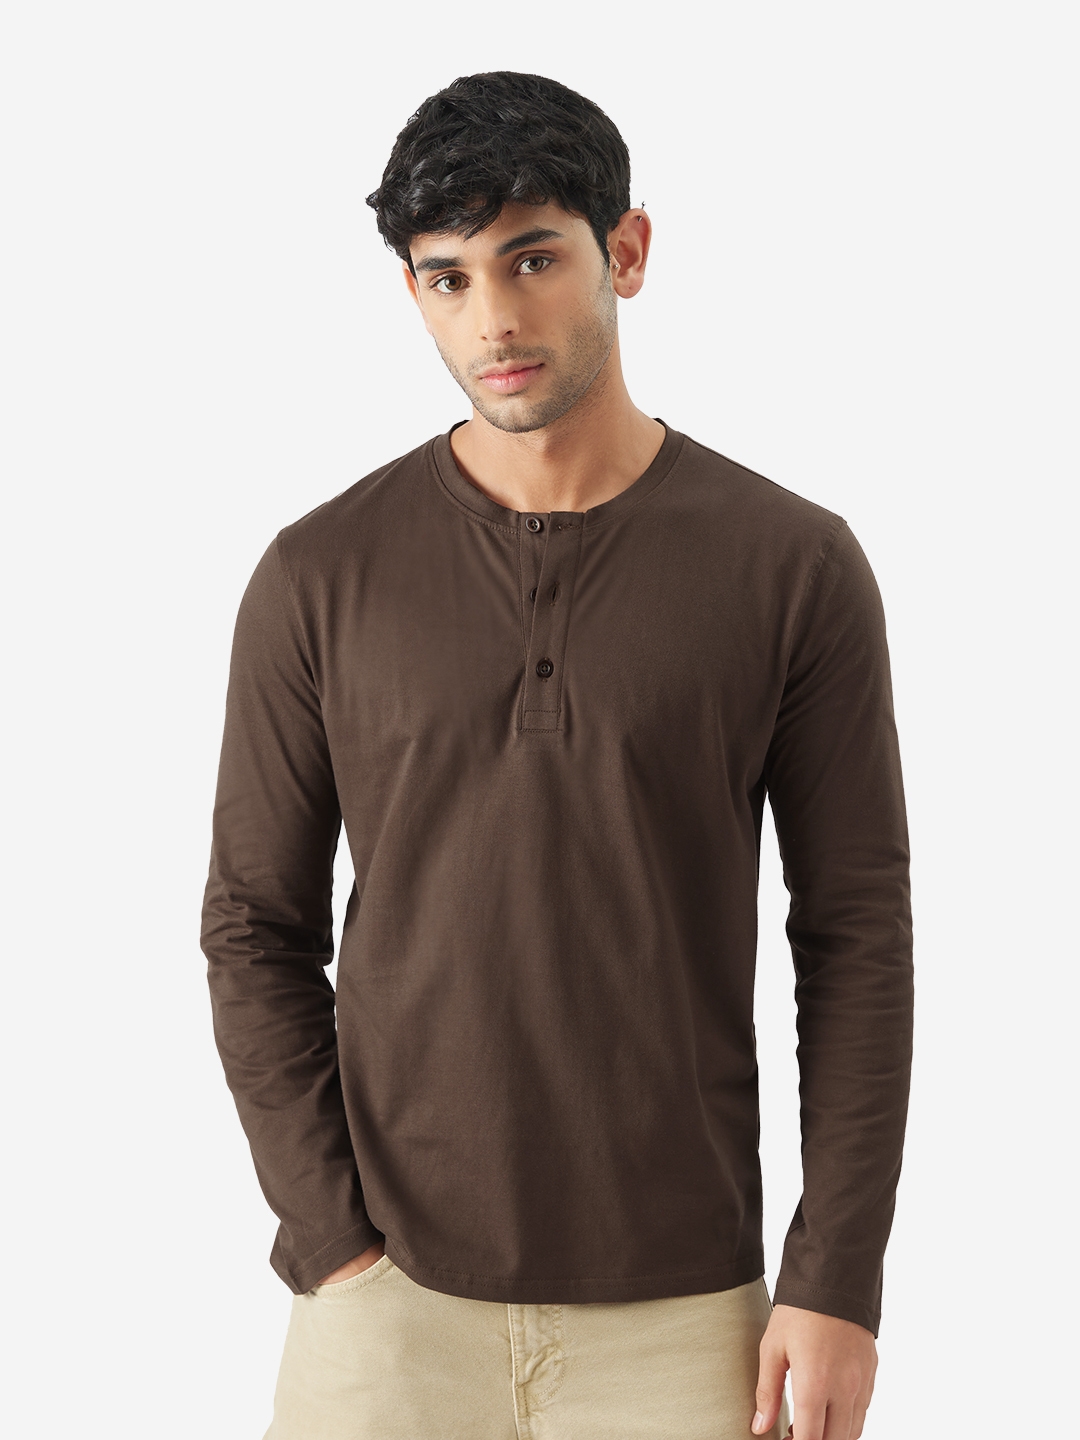 The Souled Store | Men's Solids: Chocolate Brown Henley T-Shirt